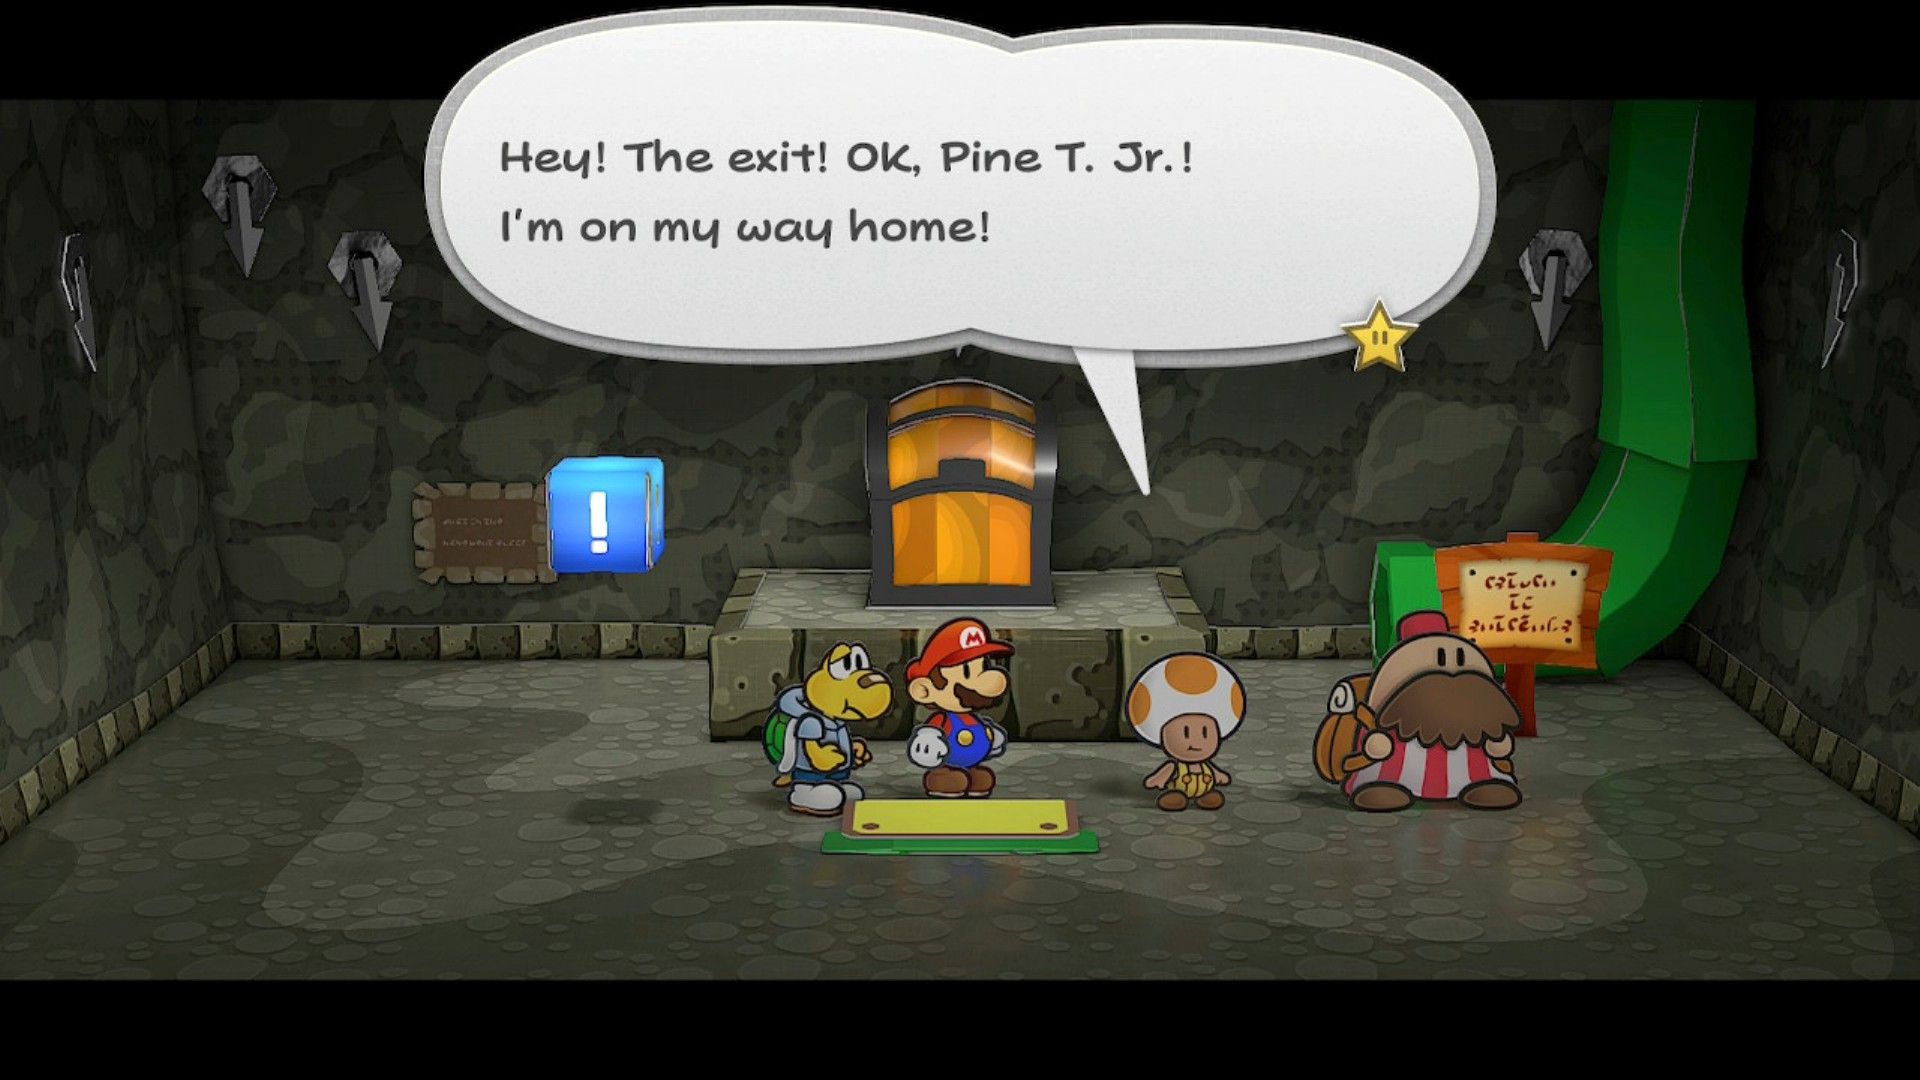 Paper Mario: The Thousand-Year Door - Pit of 100 Trials Pine T. Sr.